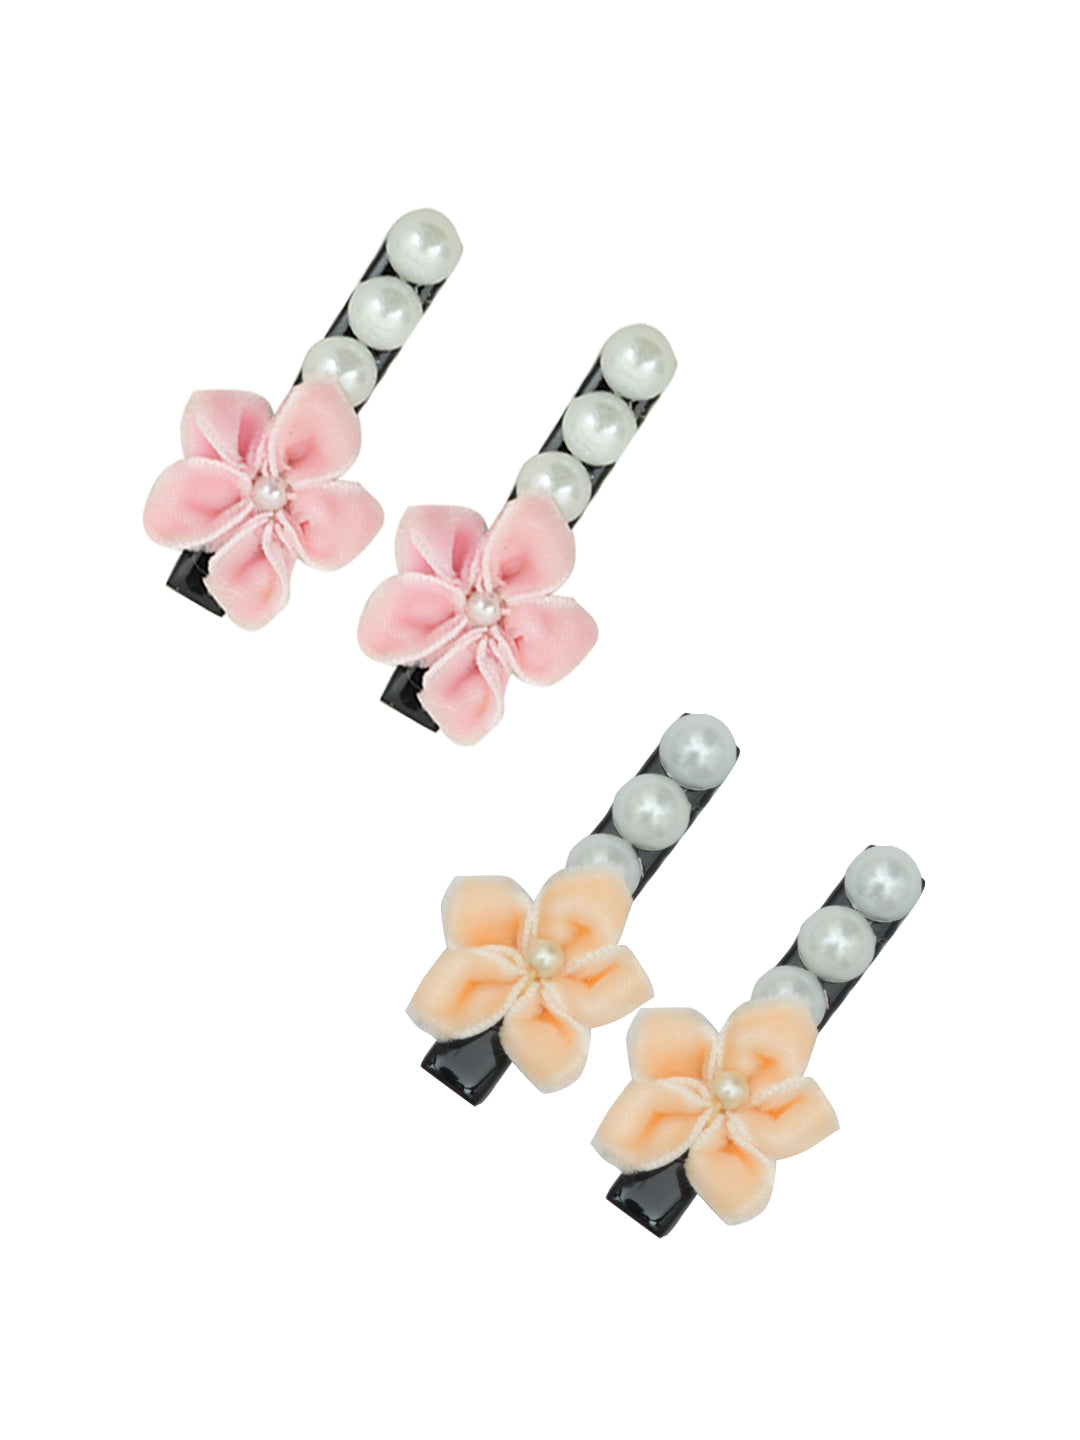 Set of 4 Multicolor Floral & Beats Hair Clips for Girls